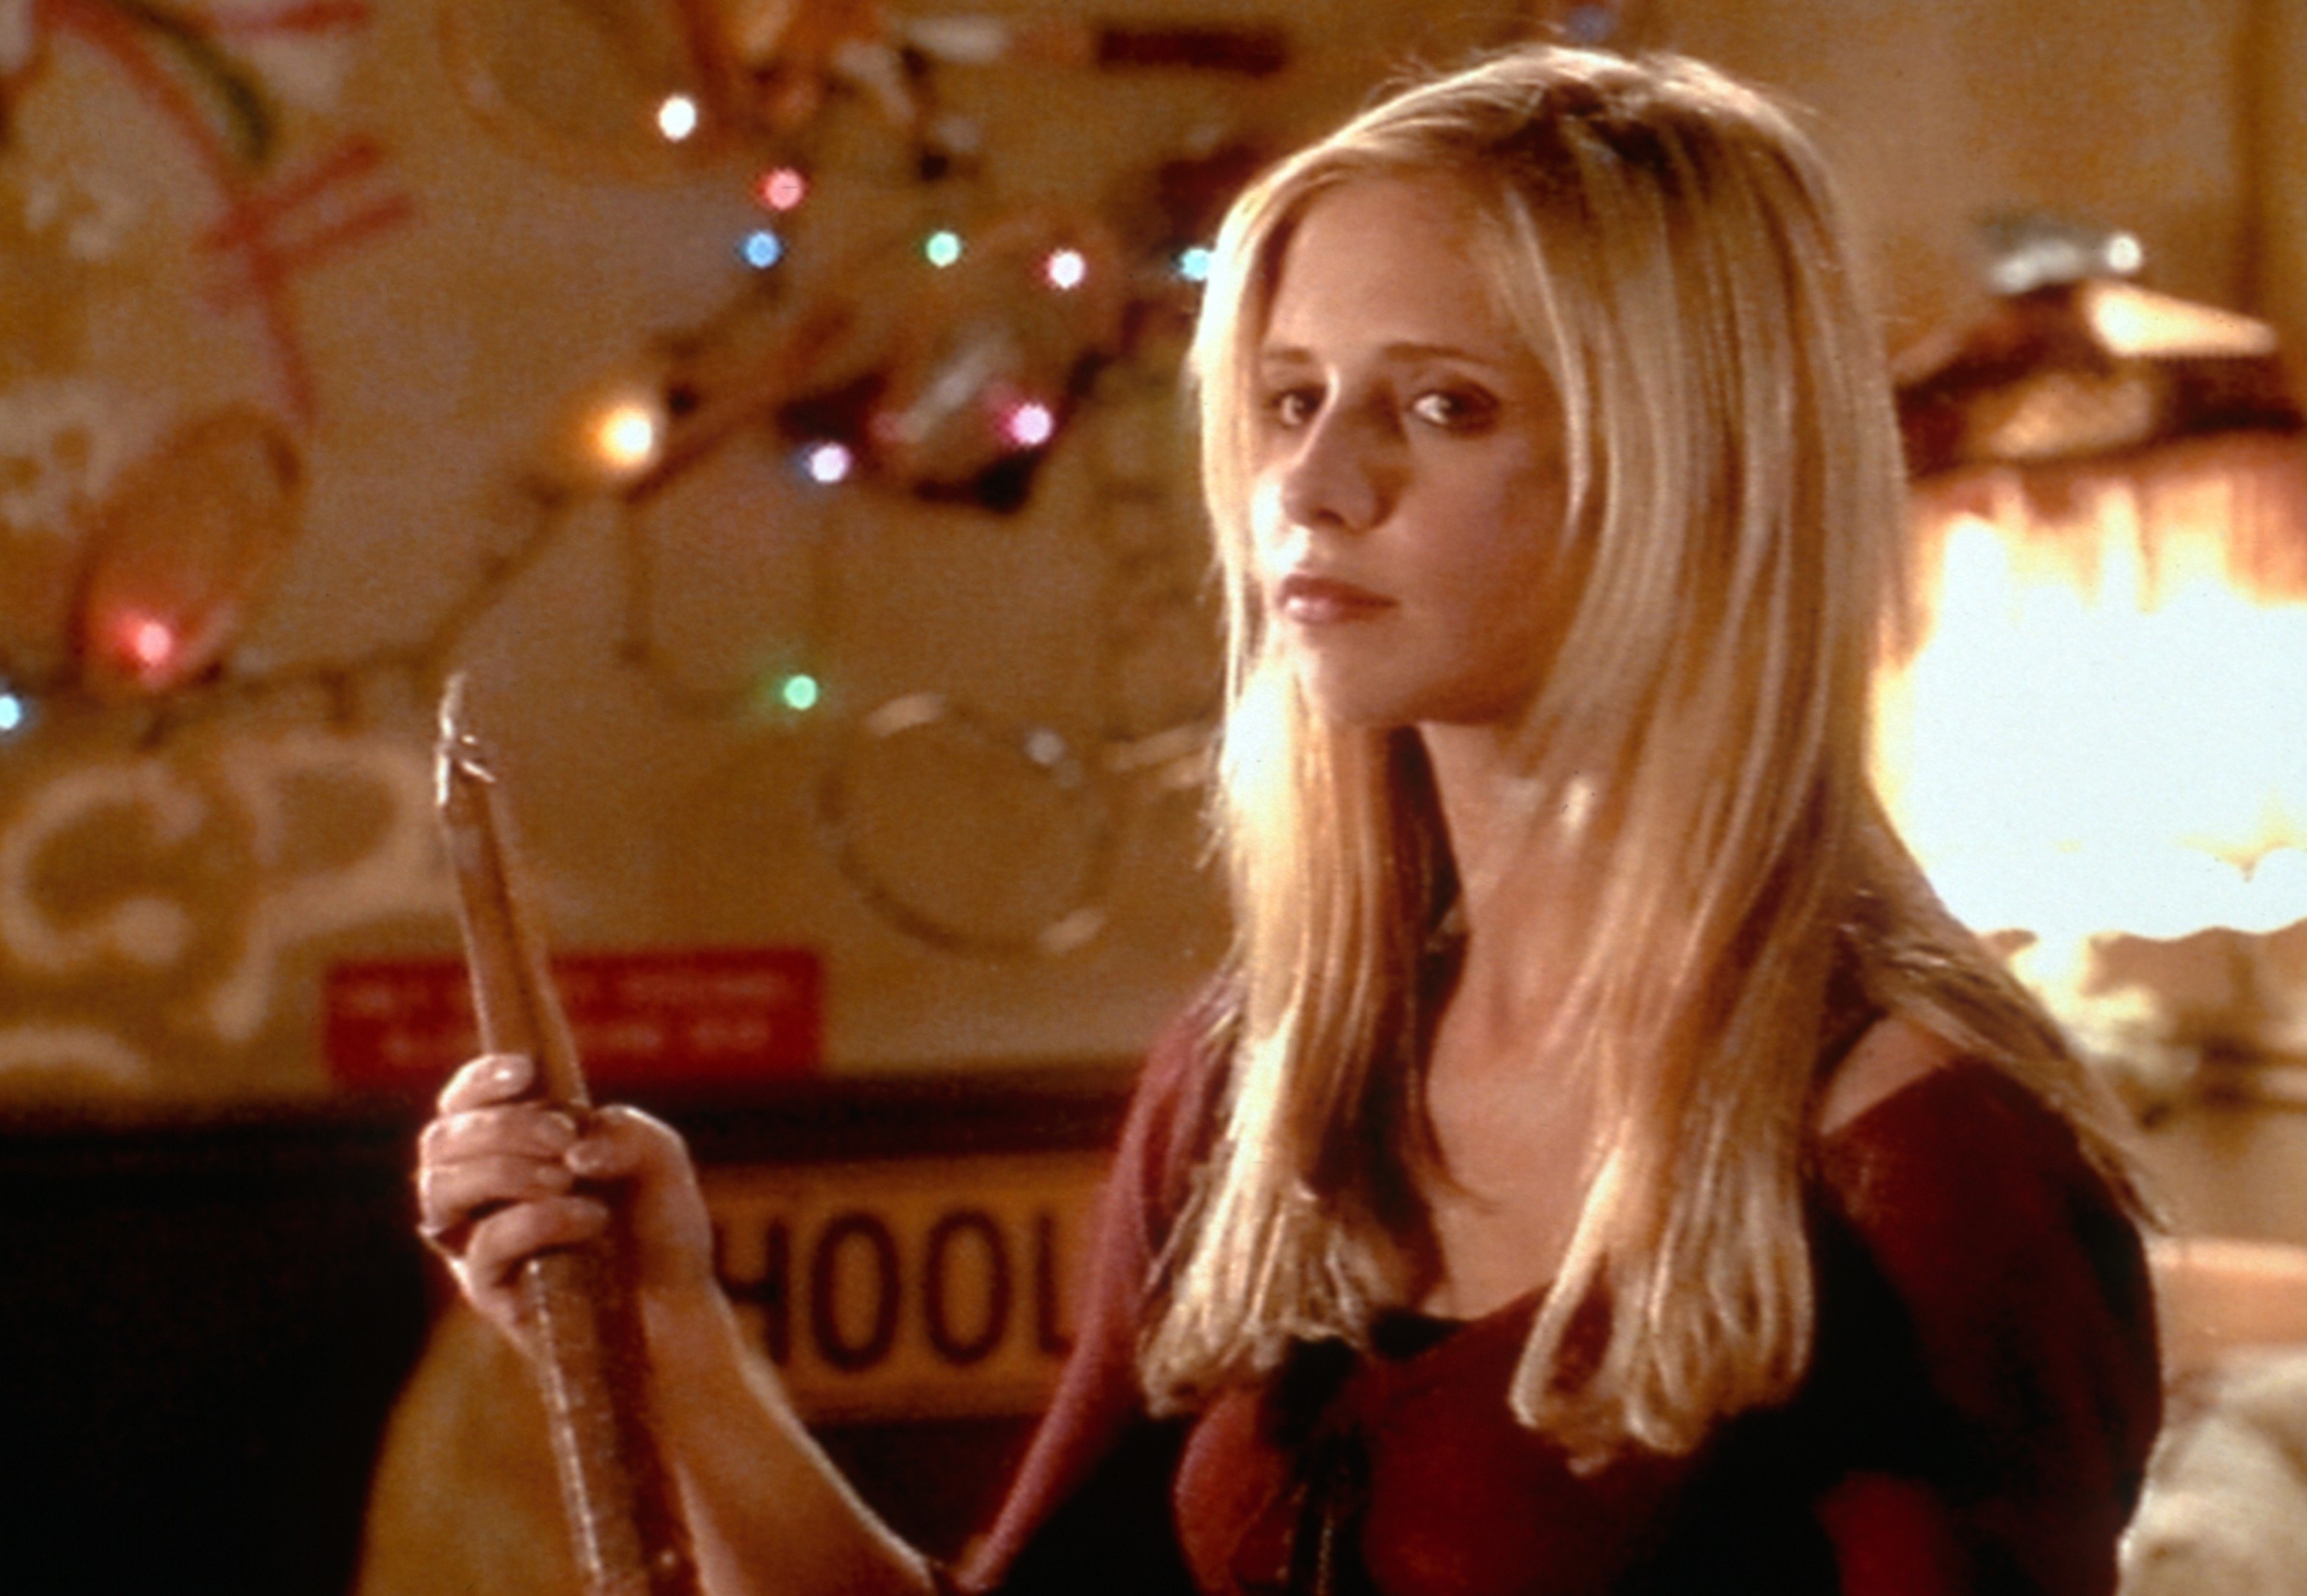 Buffy holding a weapon